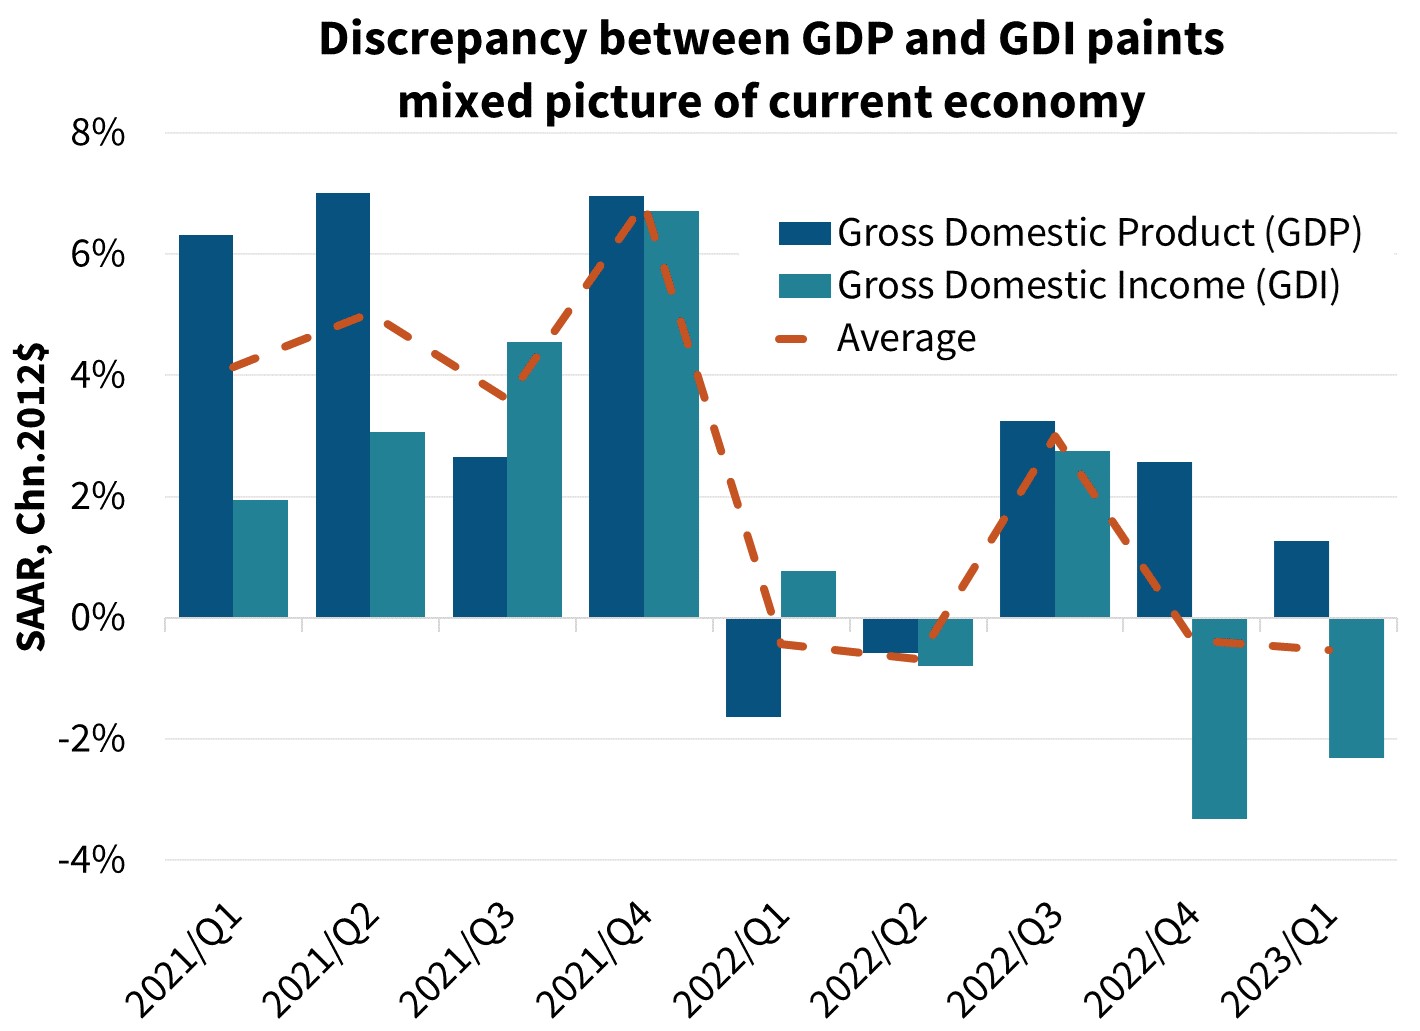  Discrepancy between GDP and GDI paints mixed picture of current economy